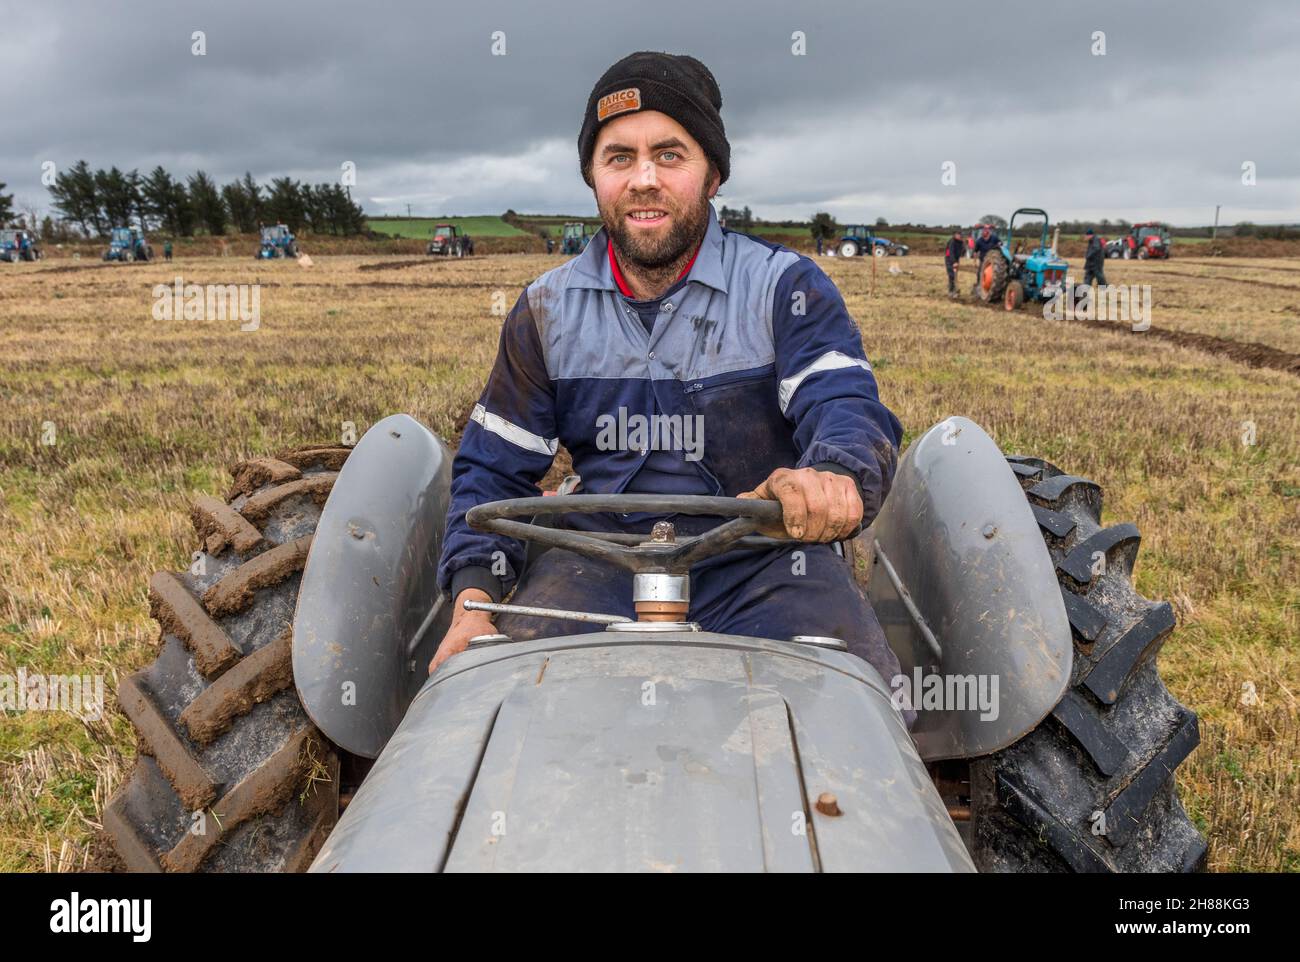 Cahermore, West Cork, Ireland. 28th November, 2021. Ger Collins from Rossmore on his vintage Ferguson 35 taking part in the Cork West Ploughing Association match on the land of Geoffery Wycherley, Cahermore, West Cork, Ireland. -  Credit: David Creedon/Alamy Live News Stock Photo